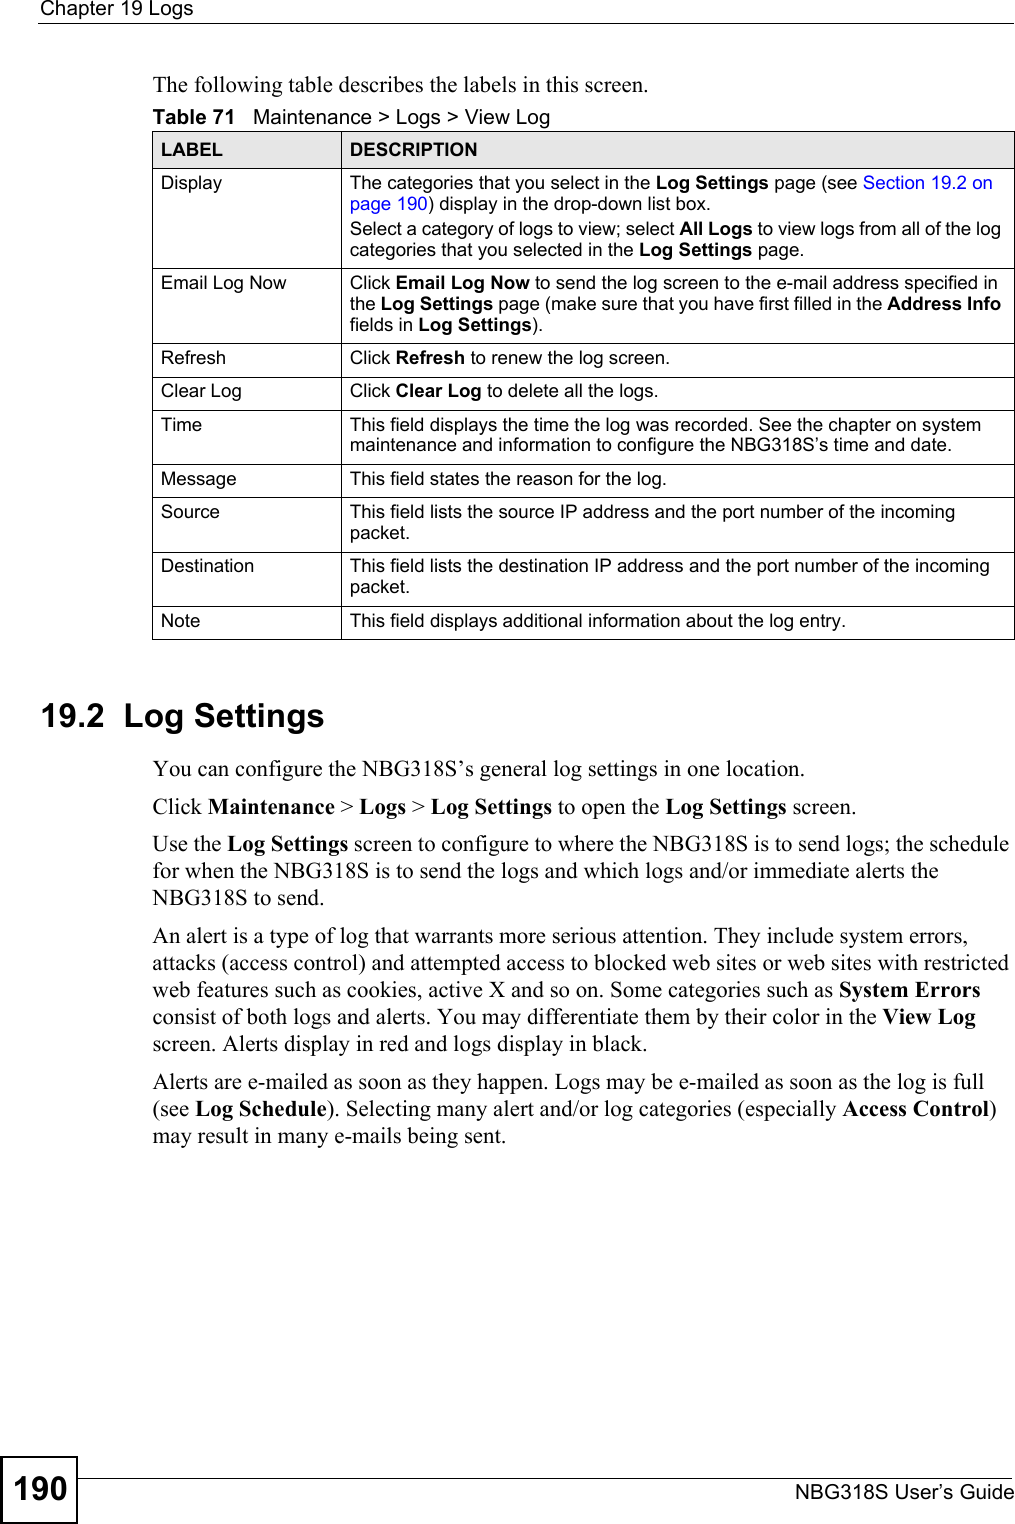 Chapter 19 LogsNBG318S User’s Guide190The following table describes the labels in this screen.19.2  Log SettingsYou can configure the NBG318S’s general log settings in one location.Click Maintenance &gt; Logs &gt; Log Settings to open the Log Settings screen.Use the Log Settings screen to configure to where the NBG318S is to send logs; the schedule for when the NBG318S is to send the logs and which logs and/or immediate alerts the NBG318S to send.An alert is a type of log that warrants more serious attention. They include system errors, attacks (access control) and attempted access to blocked web sites or web sites with restricted web features such as cookies, active X and so on. Some categories such as System Errors consist of both logs and alerts. You may differentiate them by their color in the View Log screen. Alerts display in red and logs display in black.Alerts are e-mailed as soon as they happen. Logs may be e-mailed as soon as the log is full (see Log Schedule). Selecting many alert and/or log categories (especially Access Control) may result in many e-mails being sent.Table 71   Maintenance &gt; Logs &gt; View LogLABEL DESCRIPTIONDisplay  The categories that you select in the Log Settings page (see Section 19.2 on page 190) display in the drop-down list box.Select a category of logs to view; select All Logs to view logs from all of the log categories that you selected in the Log Settings page. Email Log Now  Click Email Log Now to send the log screen to the e-mail address specified in the Log Settings page (make sure that you have first filled in the Address Info fields in Log Settings).Refresh Click Refresh to renew the log screen. Clear Log  Click Clear Log to delete all the logs. Time  This field displays the time the log was recorded. See the chapter on system maintenance and information to configure the NBG318S’s time and date.Message This field states the reason for the log.Source This field lists the source IP address and the port number of the incoming packet.Destination  This field lists the destination IP address and the port number of the incoming packet.Note This field displays additional information about the log entry. 